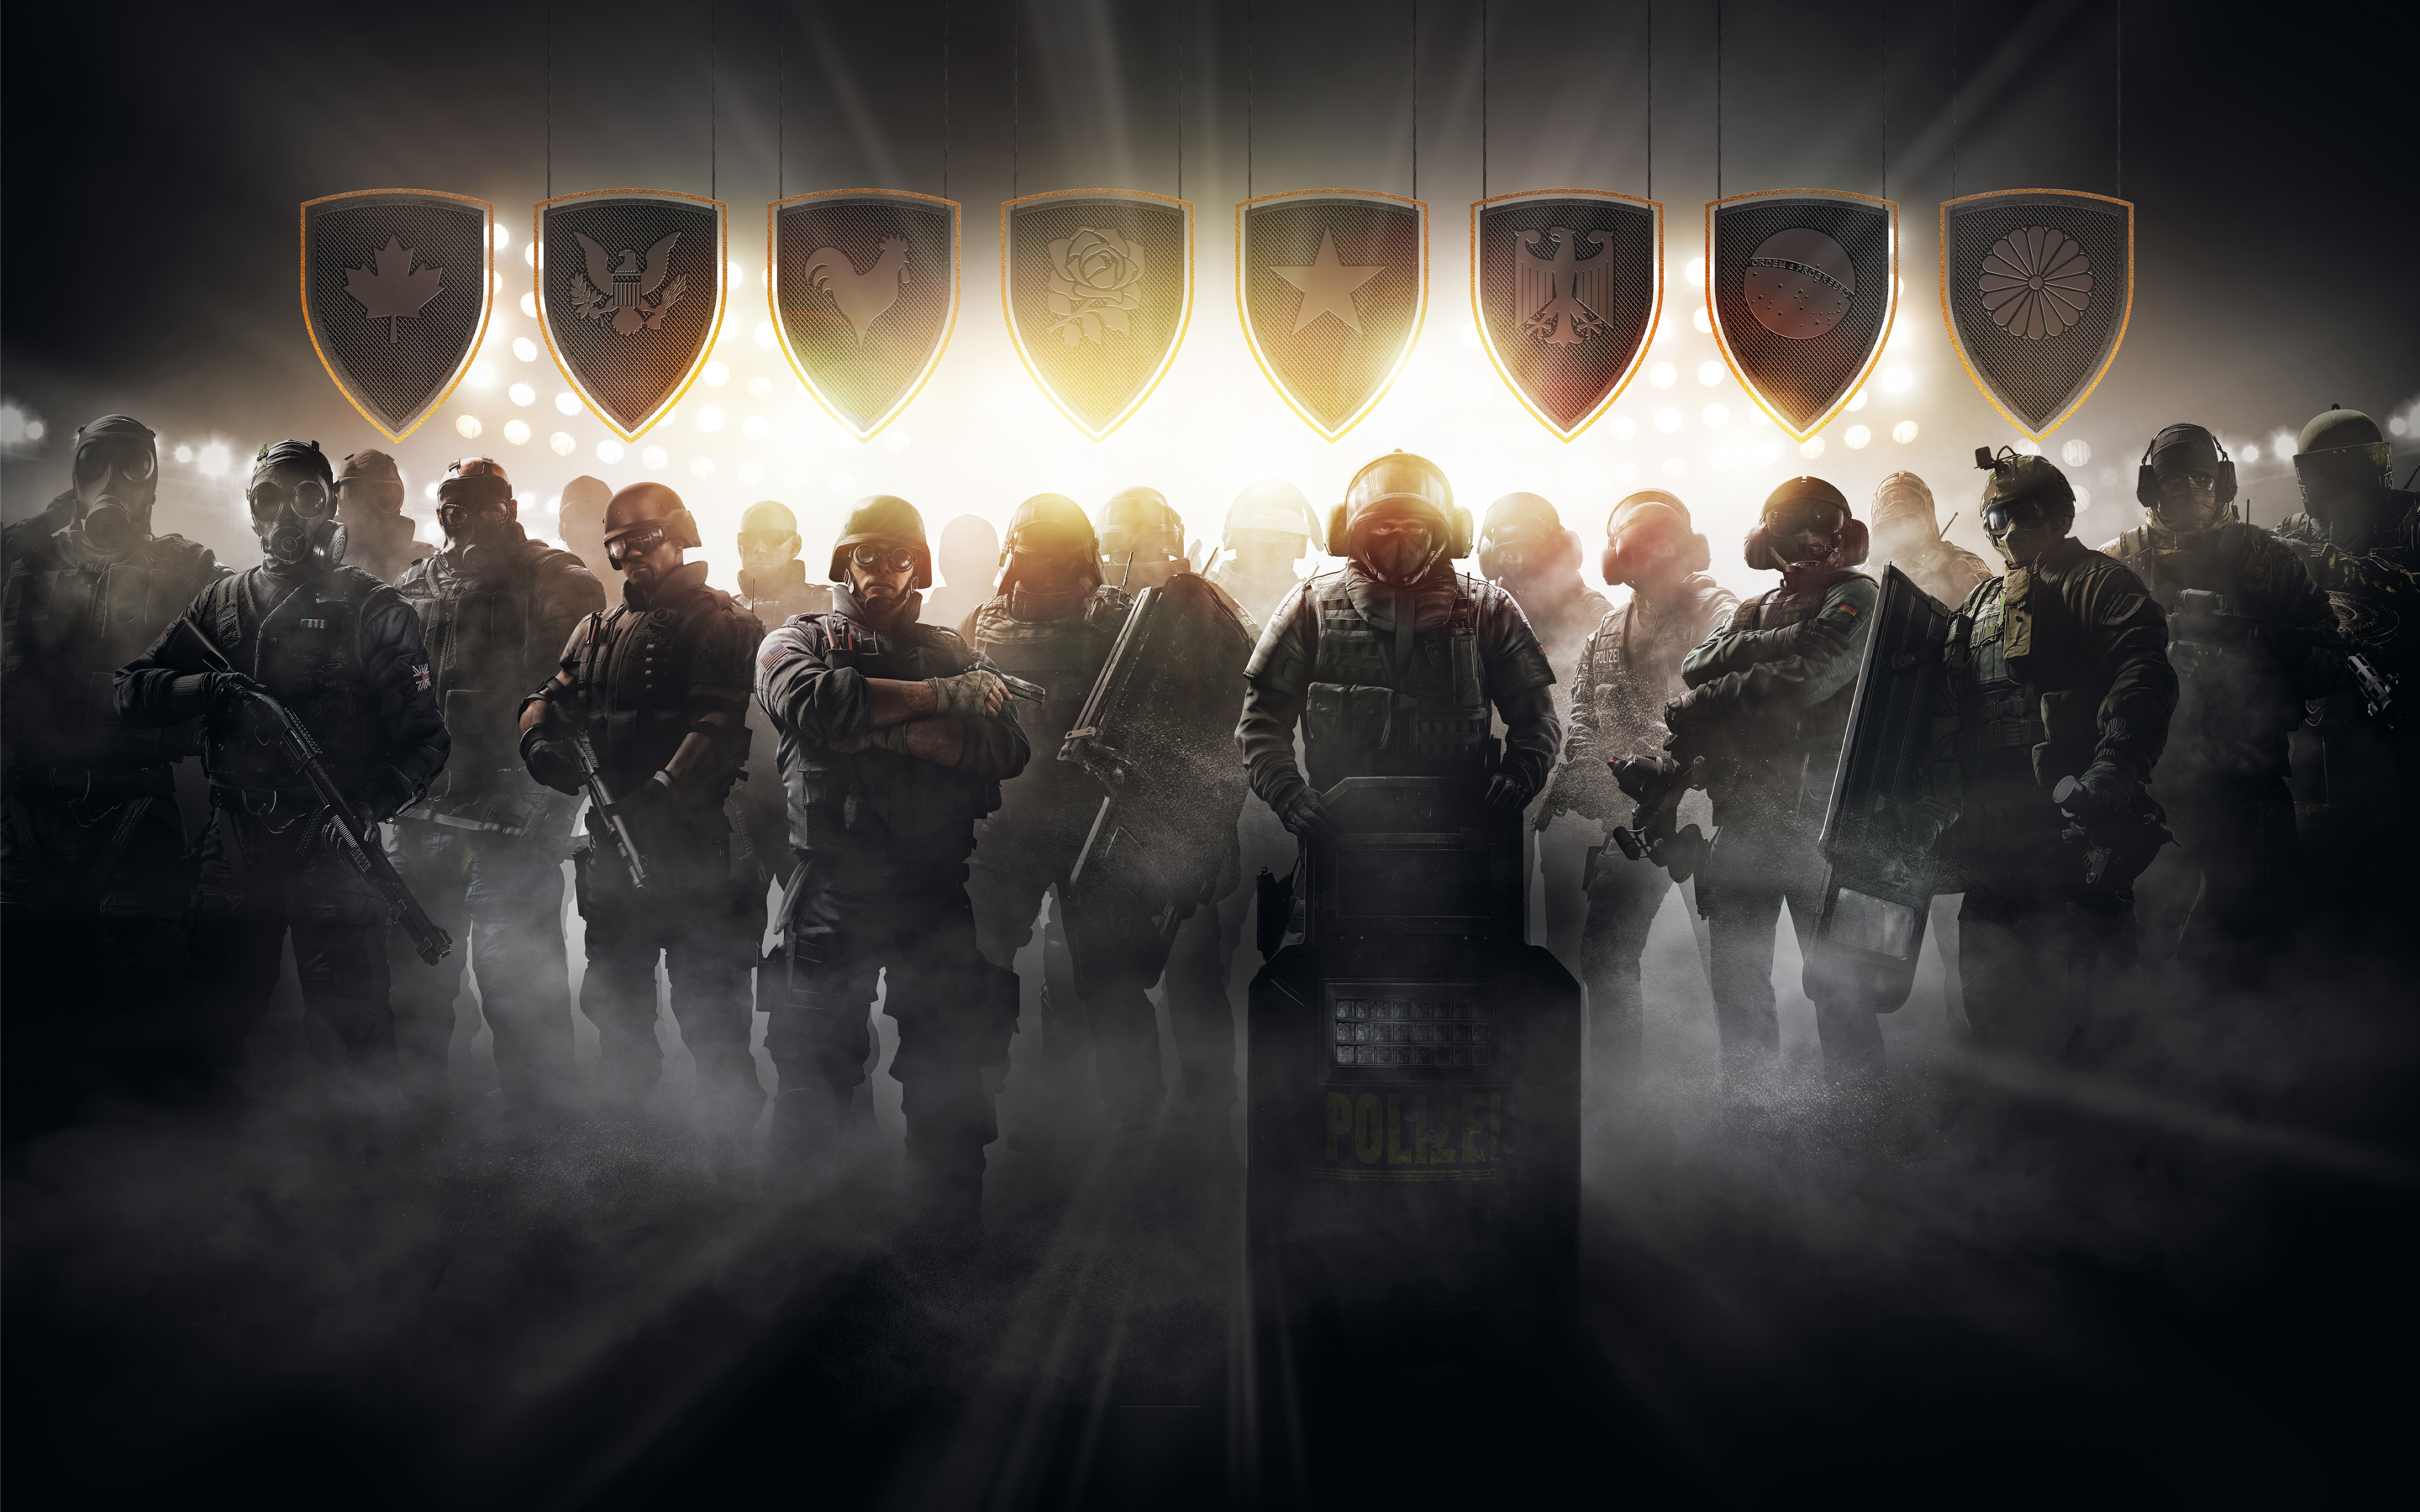 Tom Cy S Rainbow Six Siege HD Wallpaper And Background